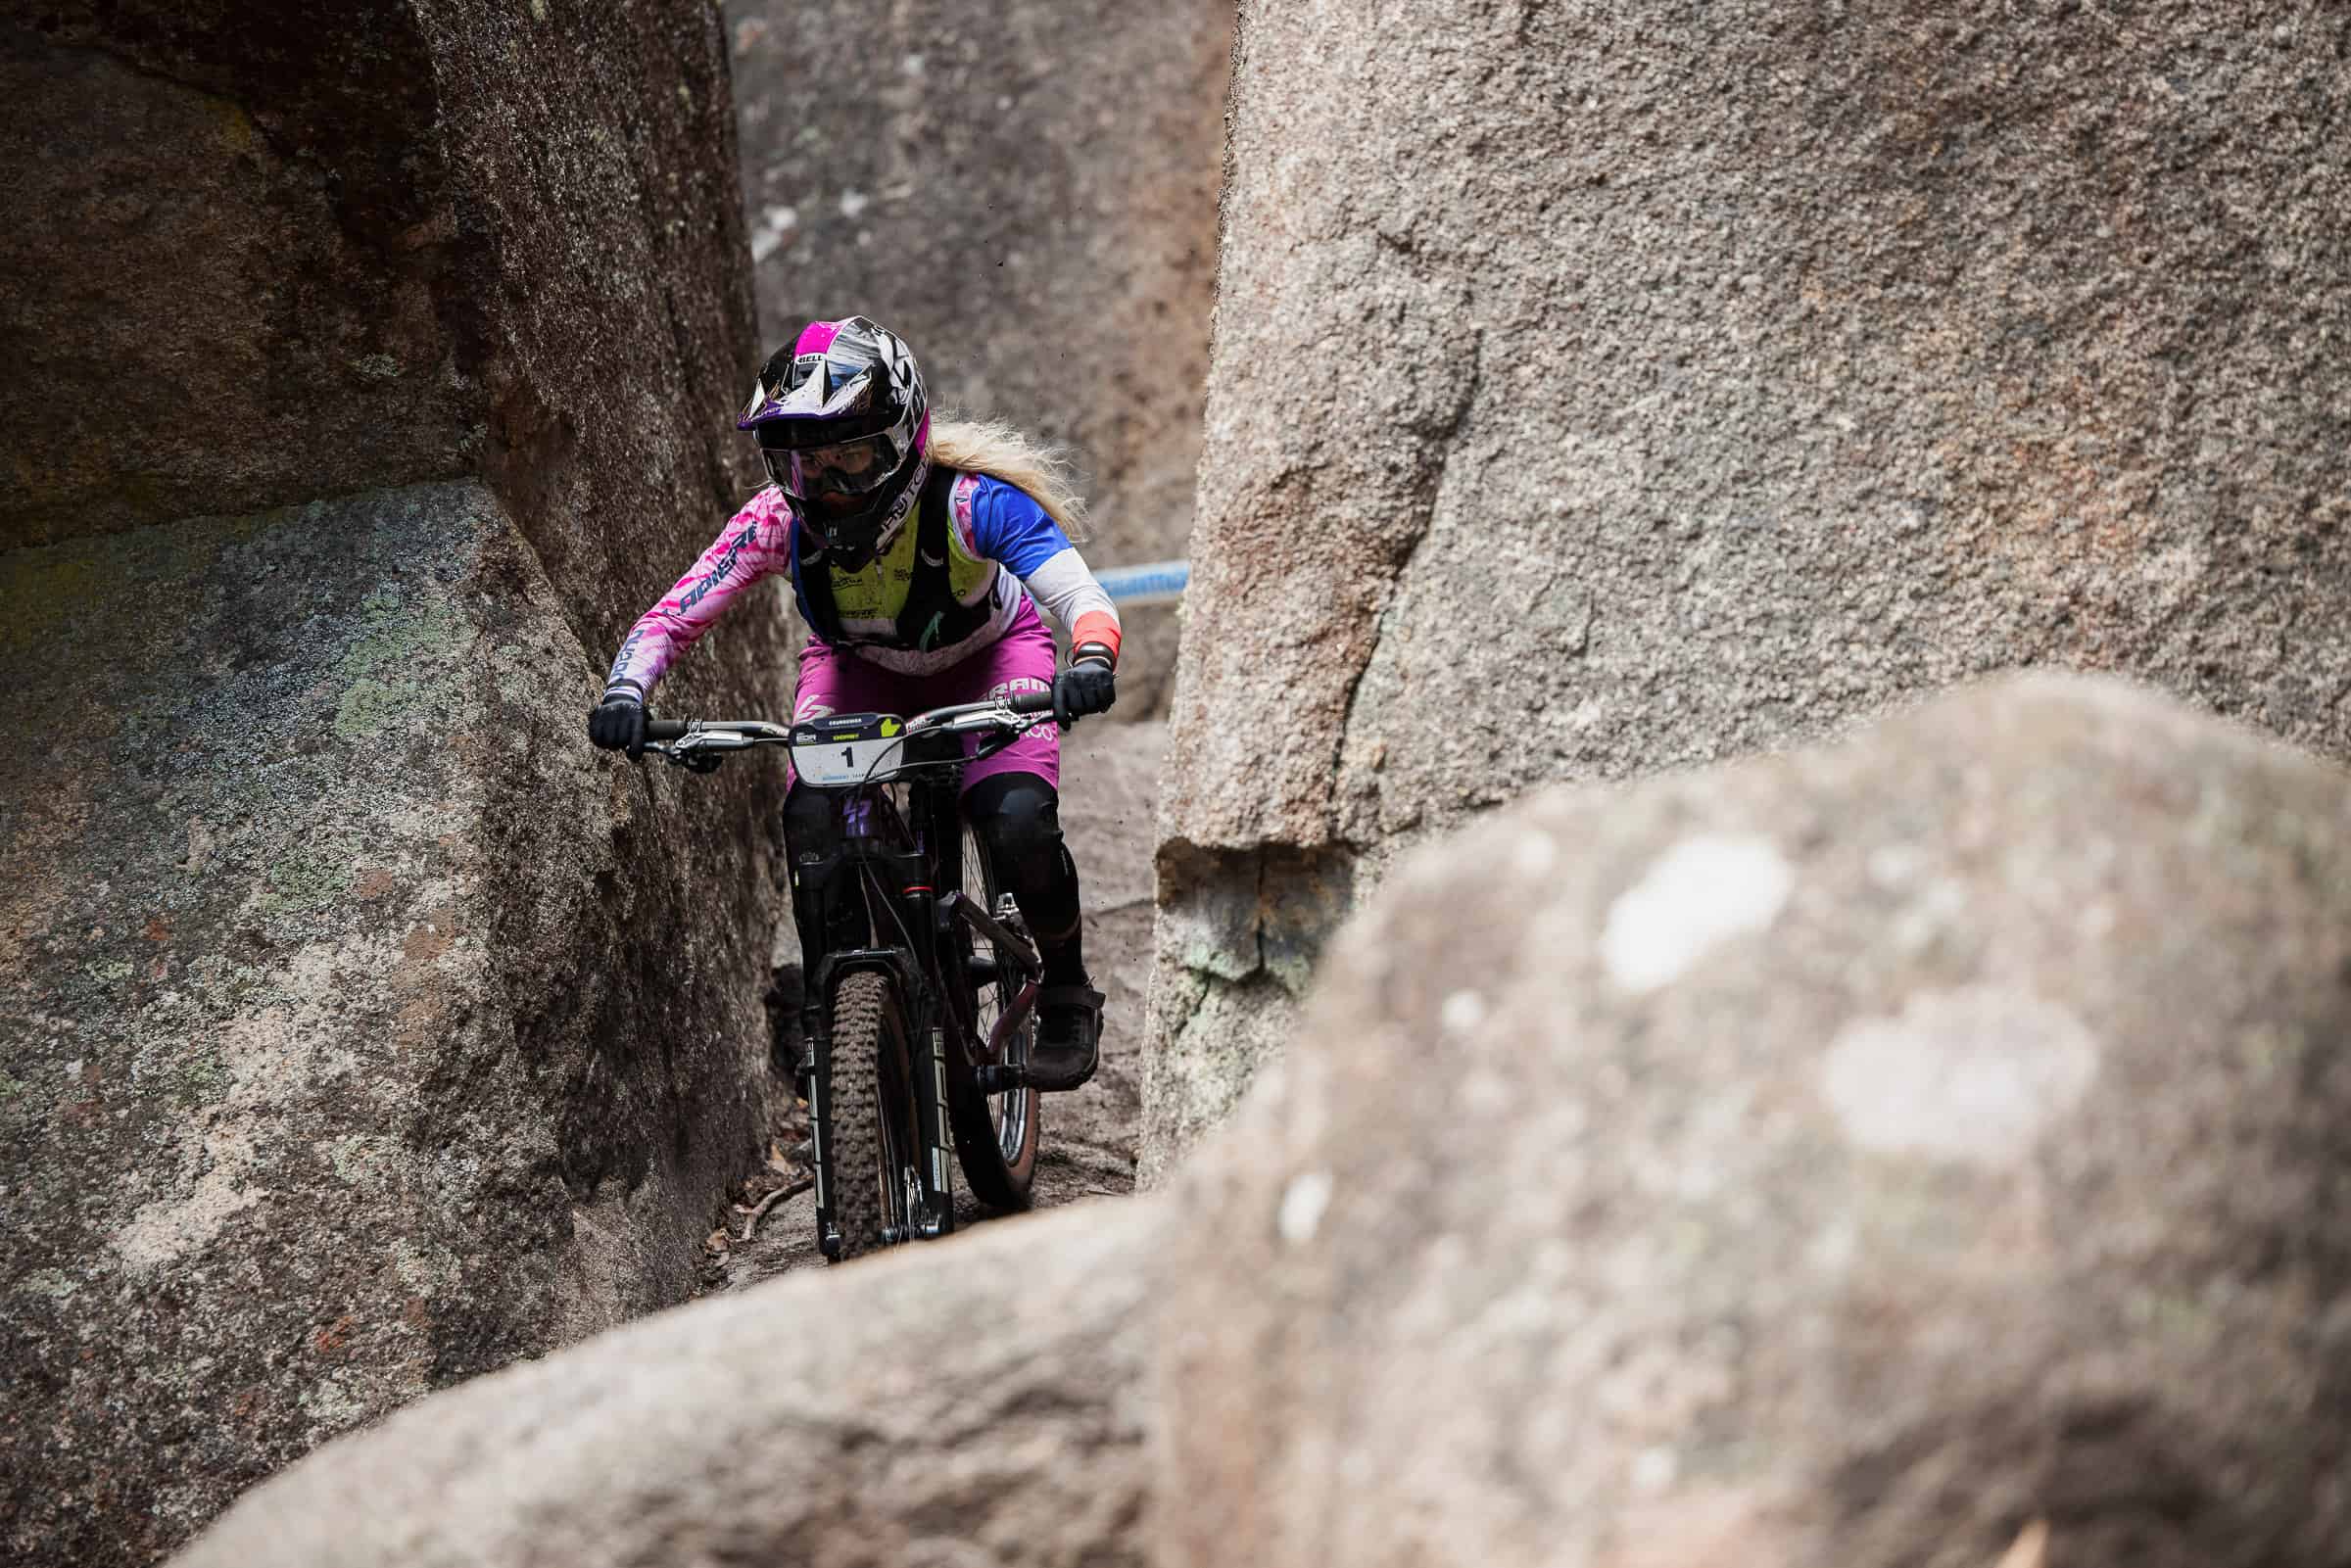 Isabeau Courdurier rips her home trails